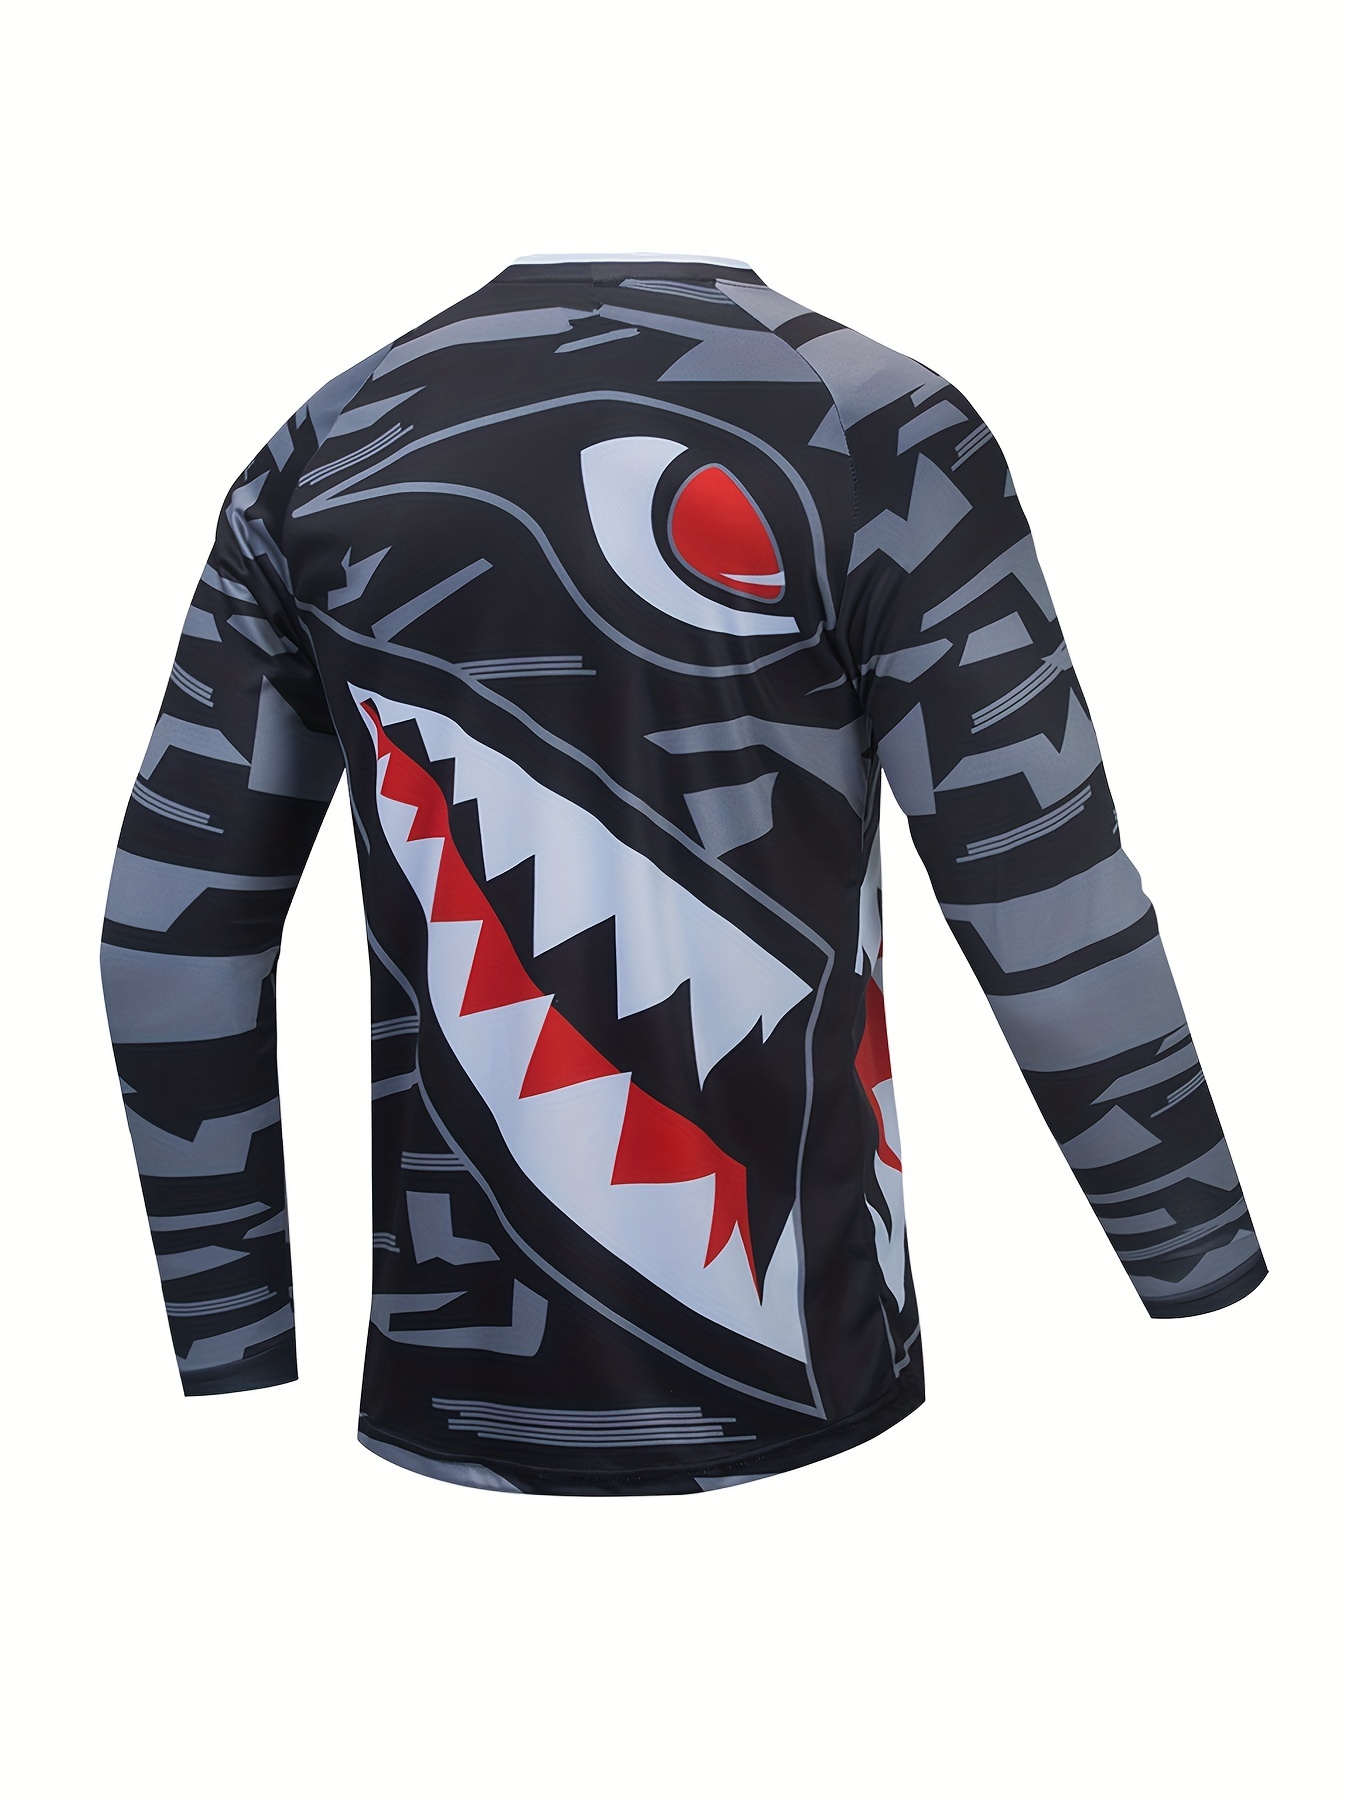 Men's UPF 50+ Sun Protection Rash Guard, Quick Dry Geometric Pattern Long Sleeve Top for Fishing Hiking, Comfortable V-Neck Casual Cycling Jersey